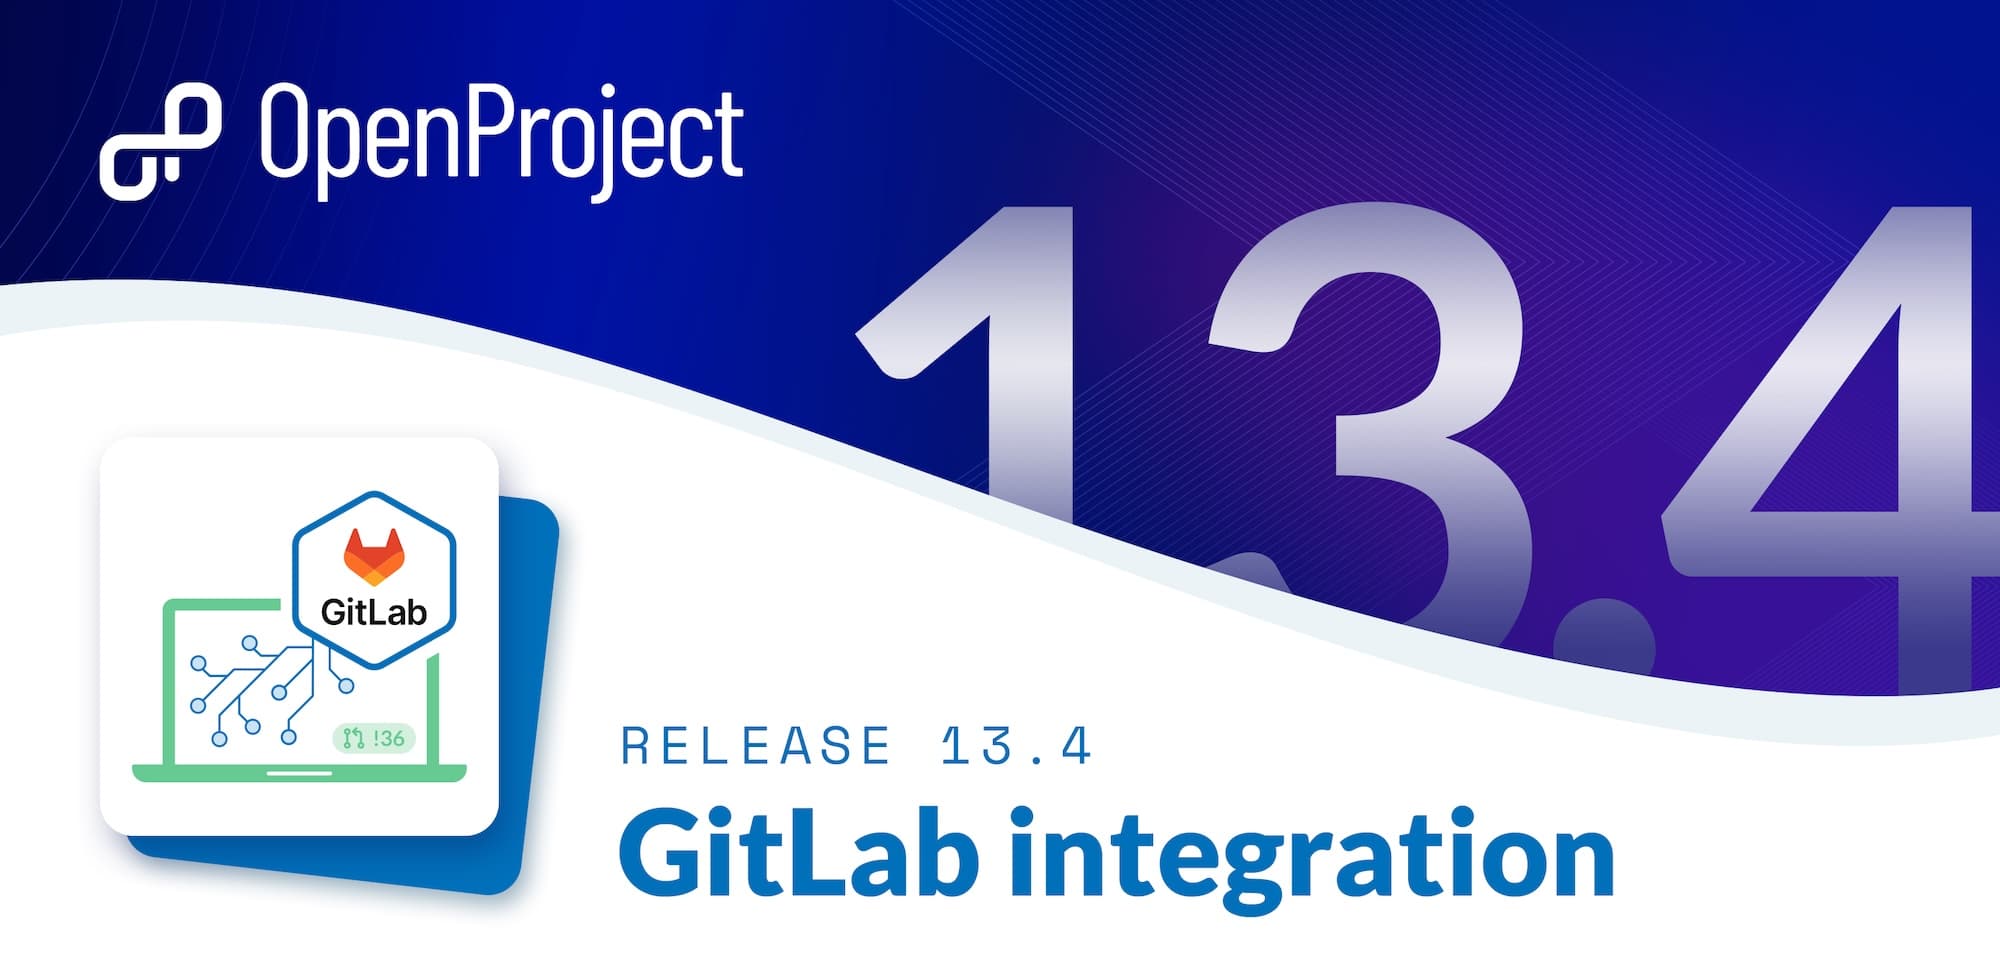 OpenProject 13.4: A GitLab integration and more